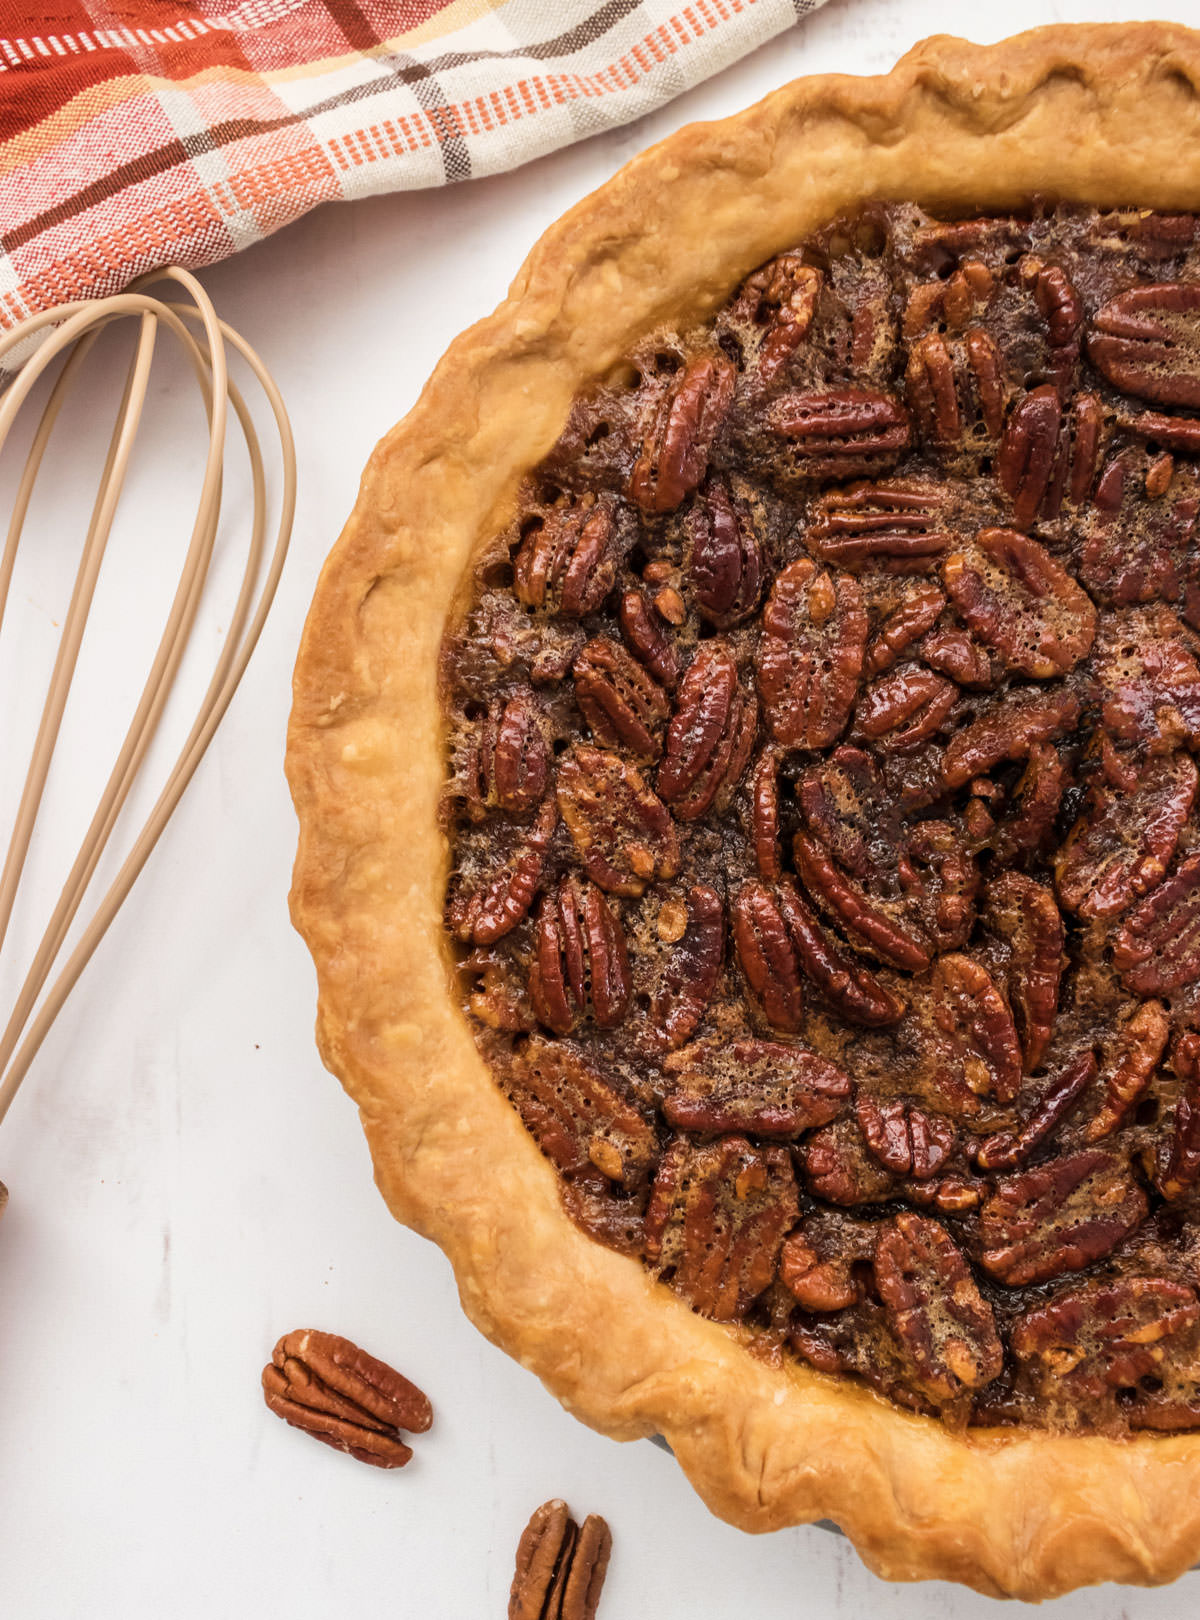 Picture showing half of a fully baked Pecan Pie on a white surface.